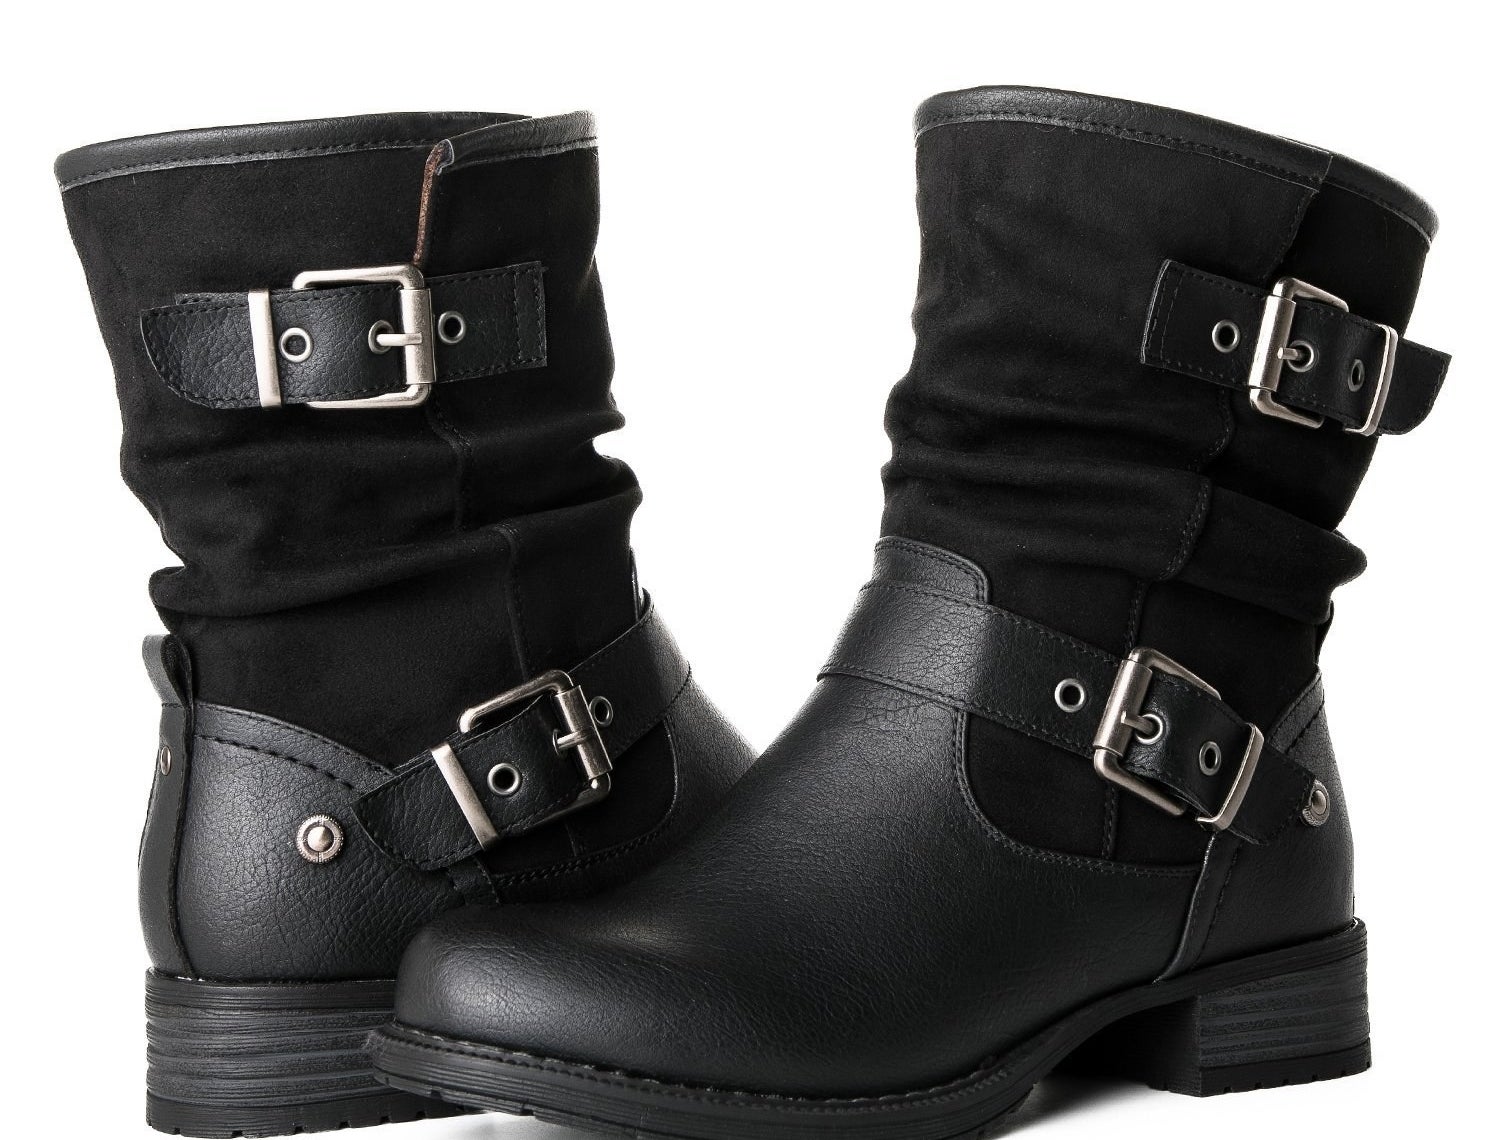 23 Pairs Of Boots Under $50 You'll Want To Buy Immediately